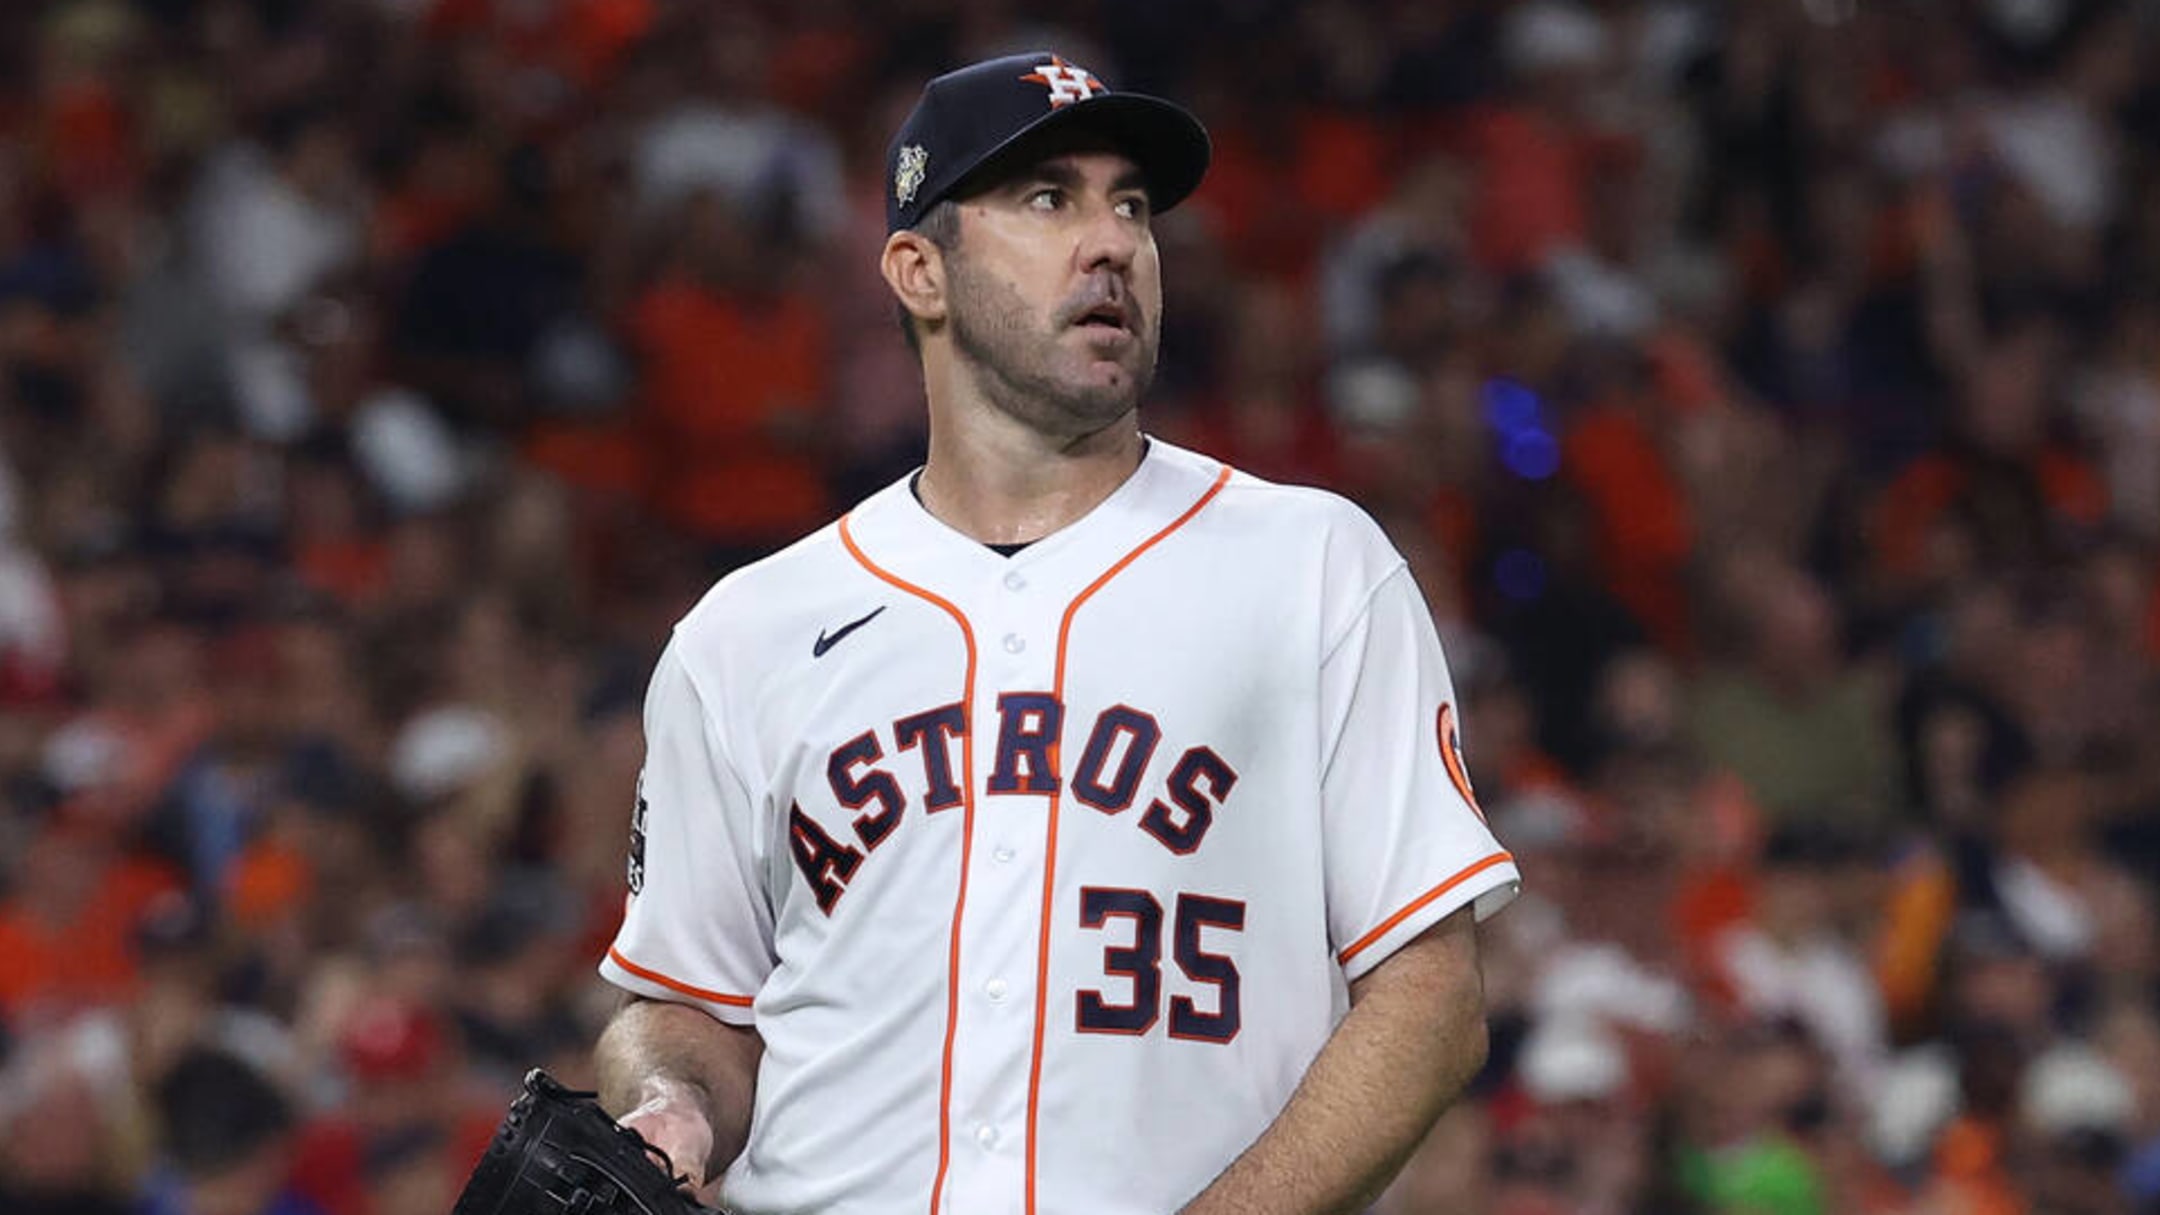 Michael Schwab on X: The Astros jerseys floating around are a fan